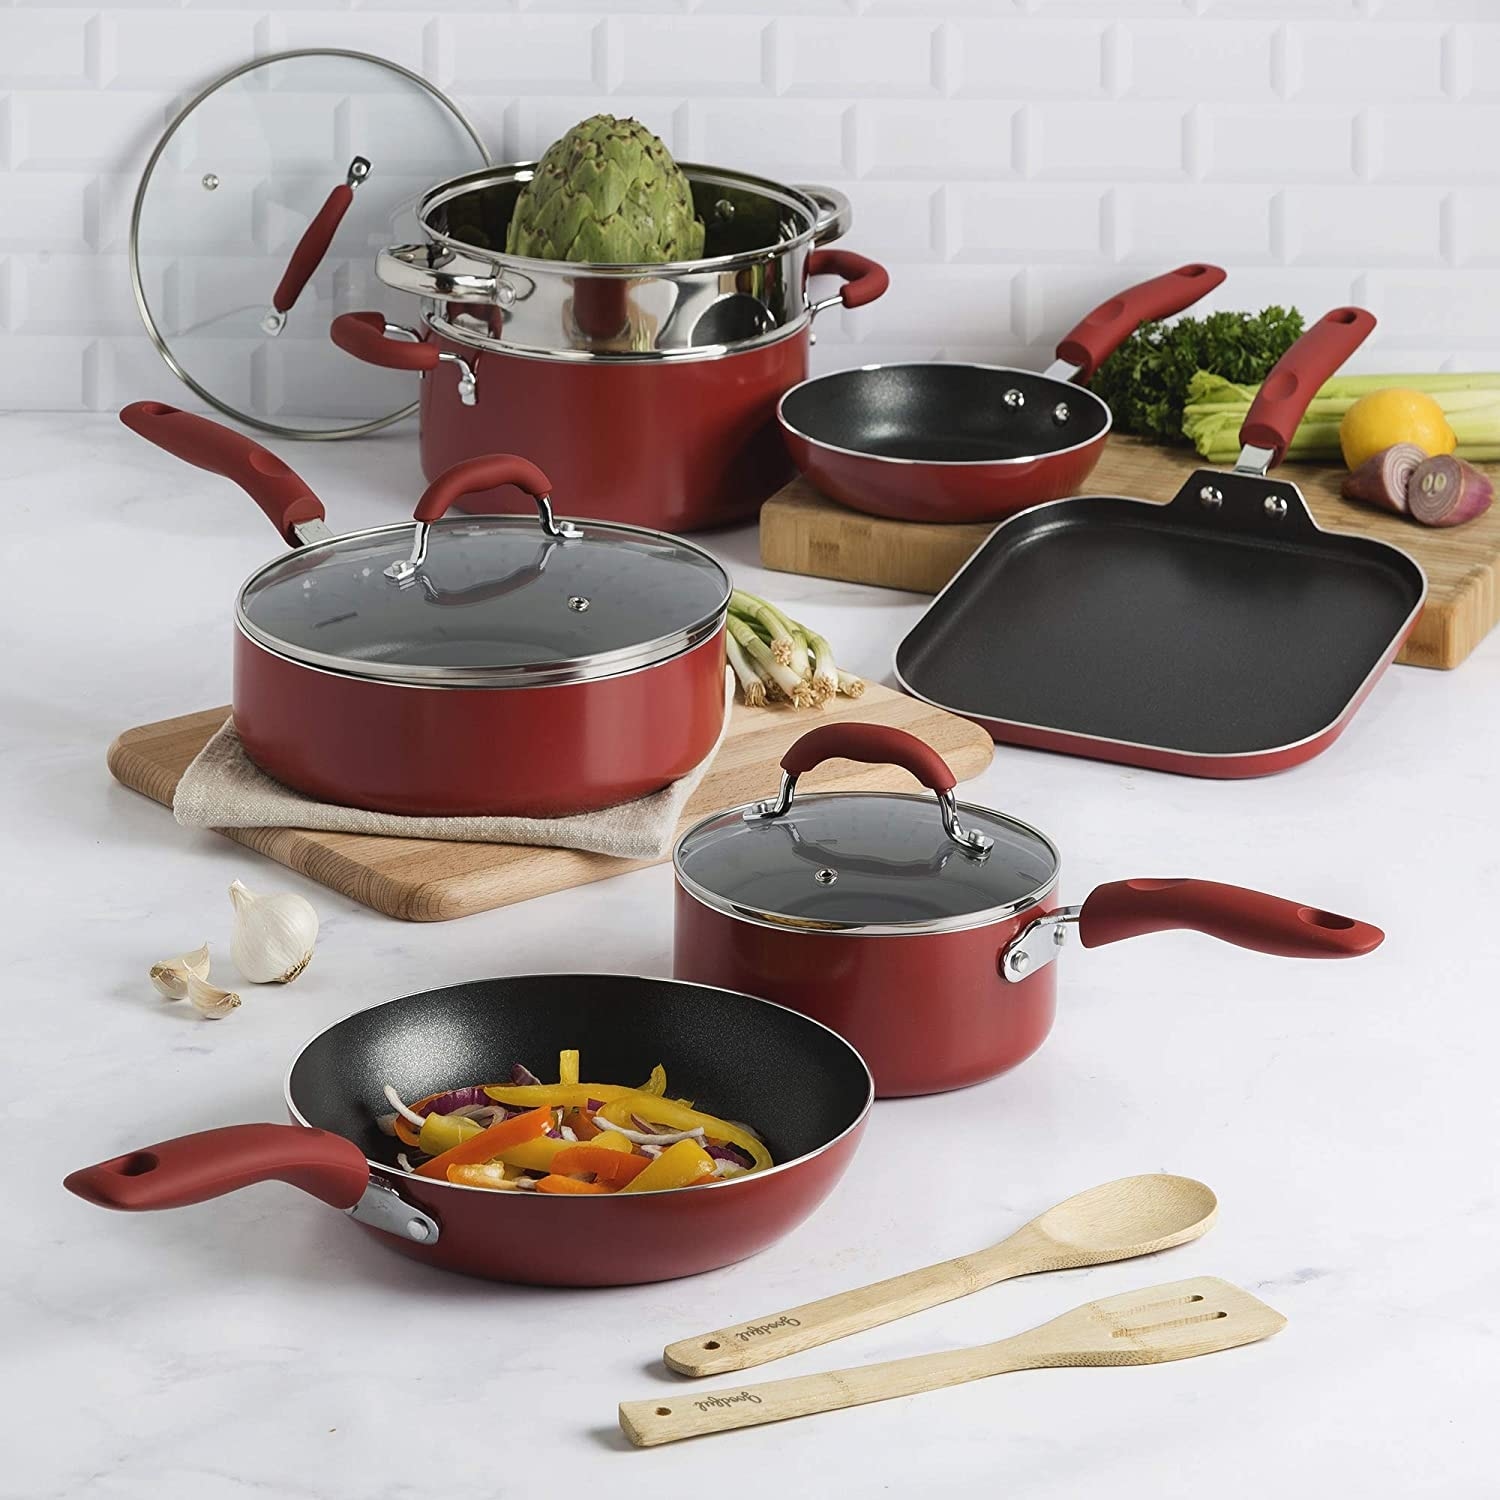 https://ak1.ostkcdn.com/images/products/is/images/direct/15c8f6e33f0b2f719efc07cb5c683b48ee9df3f4/Goodful-Cookware-Set-with-Premium-Non-Stick-Coating%2C%C2%A0-Tempered-Glass-Steam-Vented-Lids%2C-Stainless-Steel-Steamer.jpg